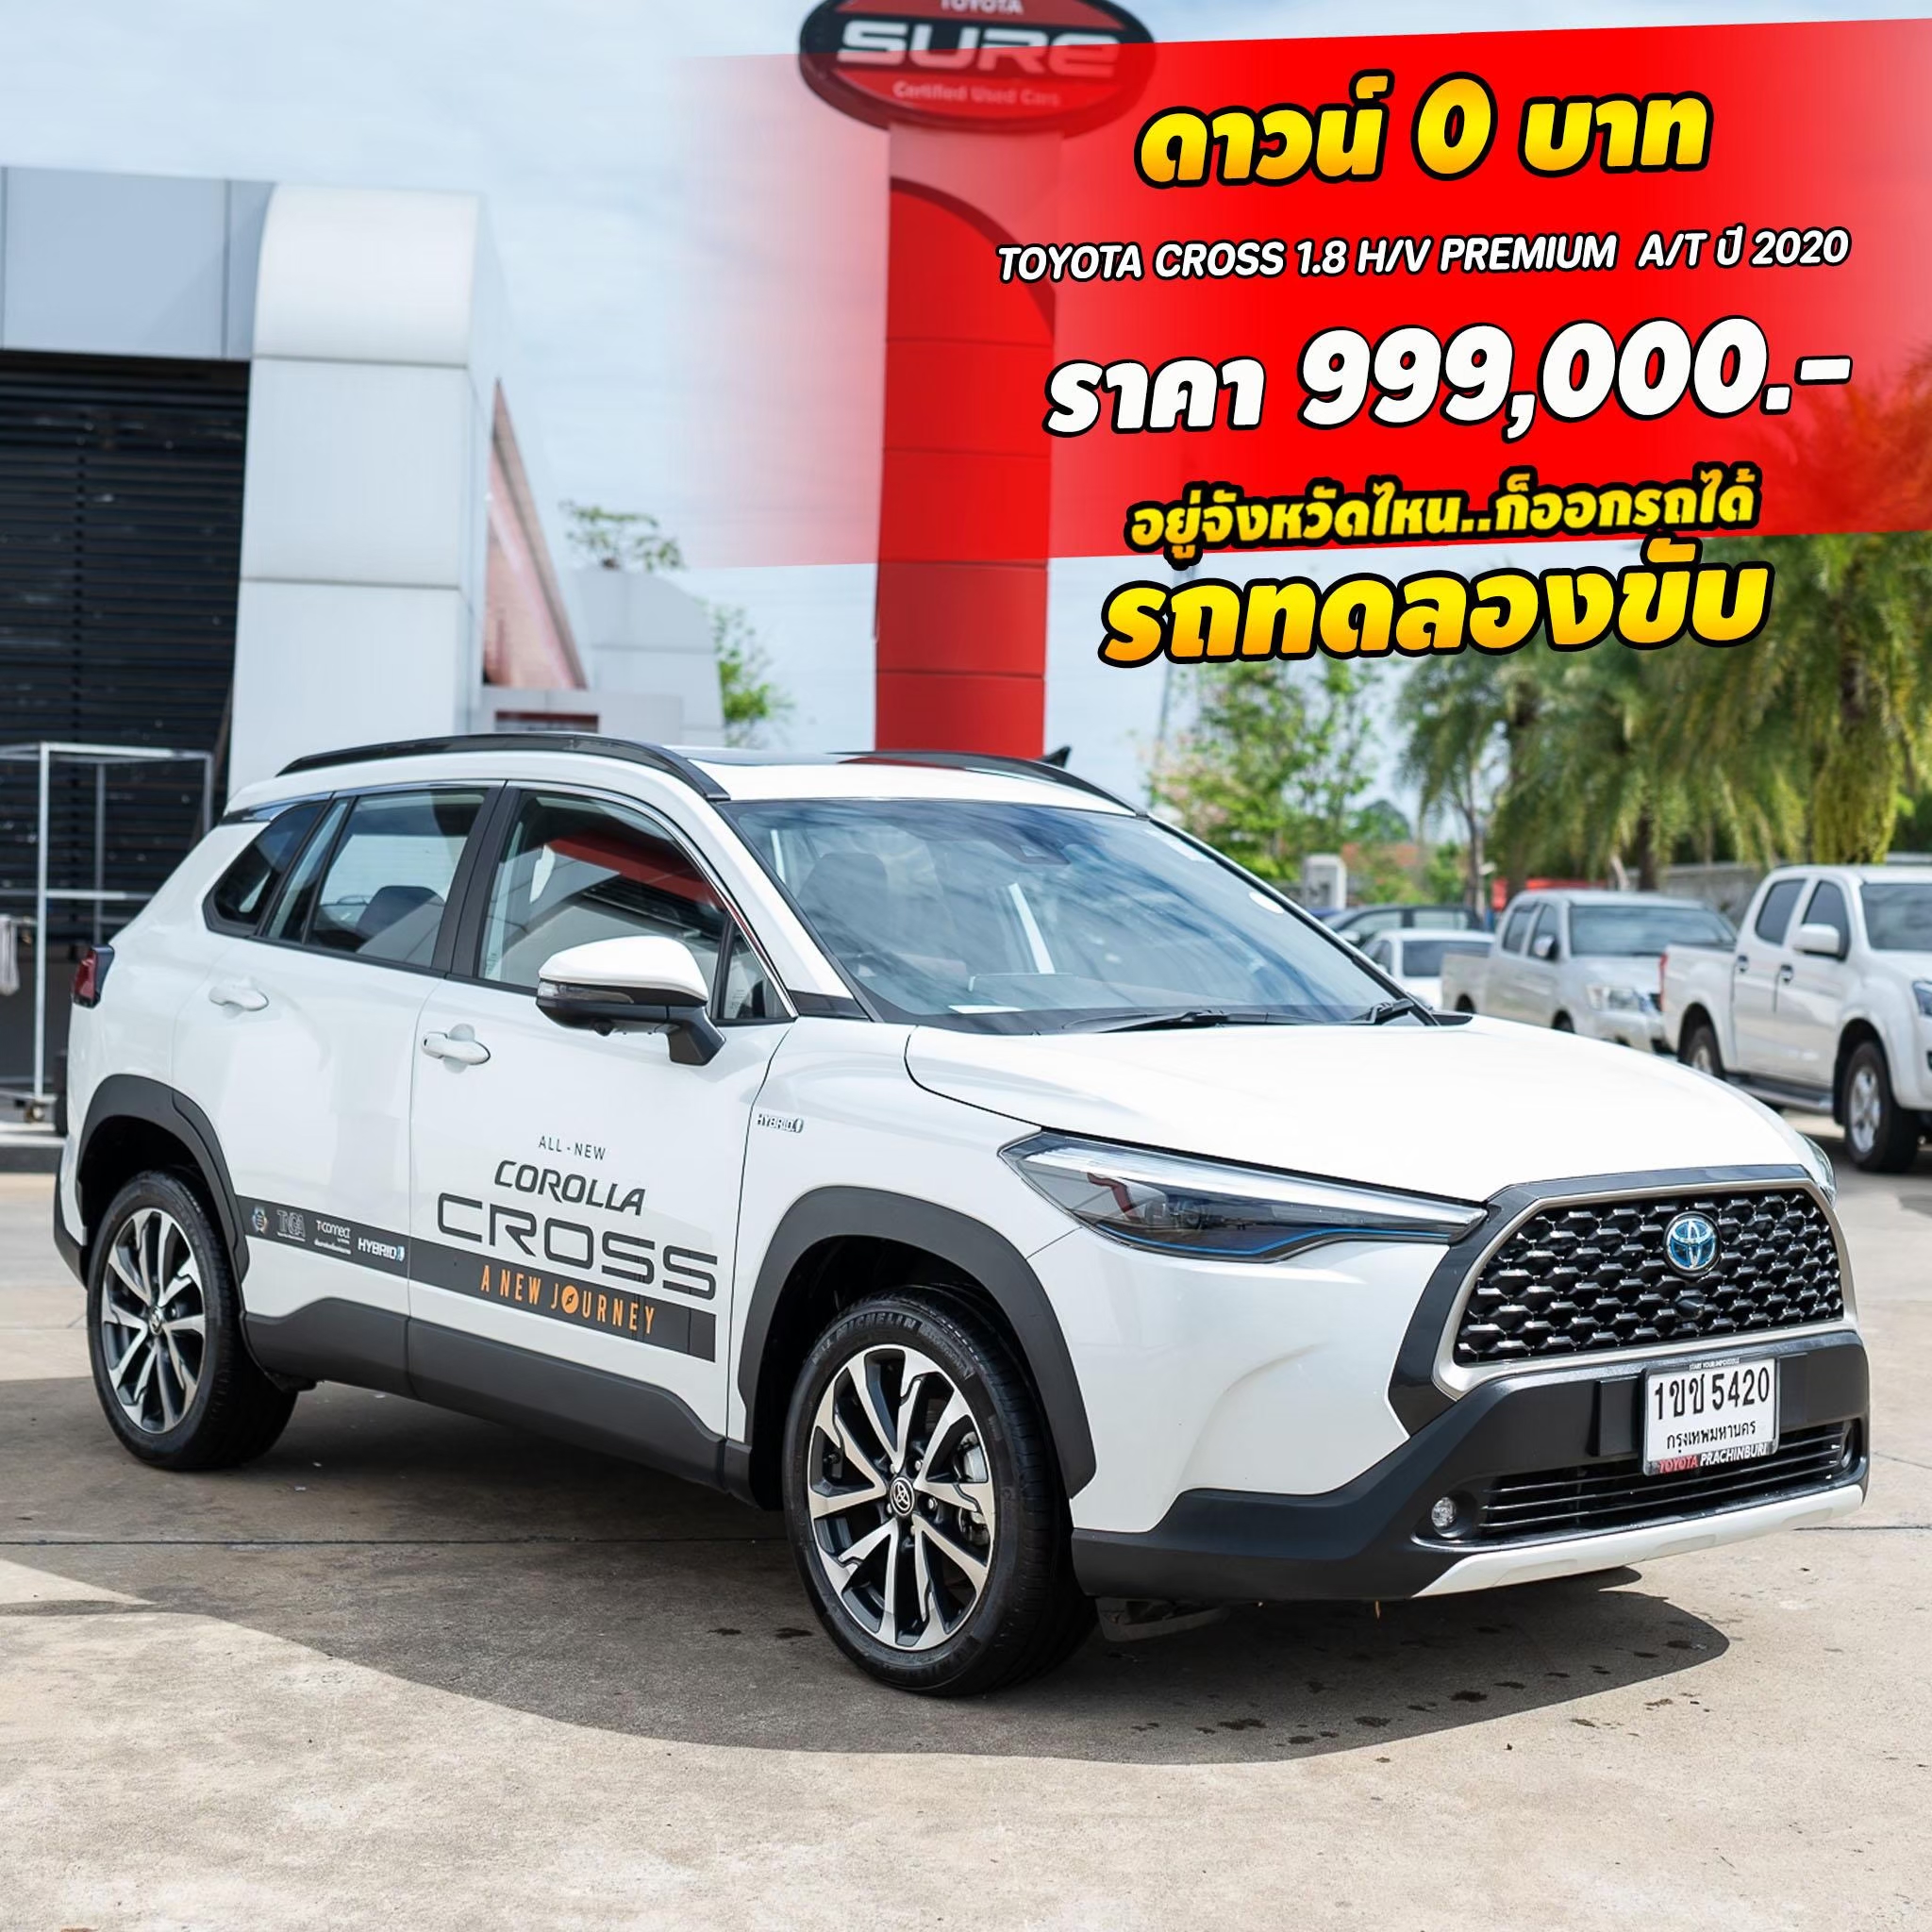 TOYOTA CROSS 1.8 H/V PREMIUM SAFETY A/T  ปี 2020